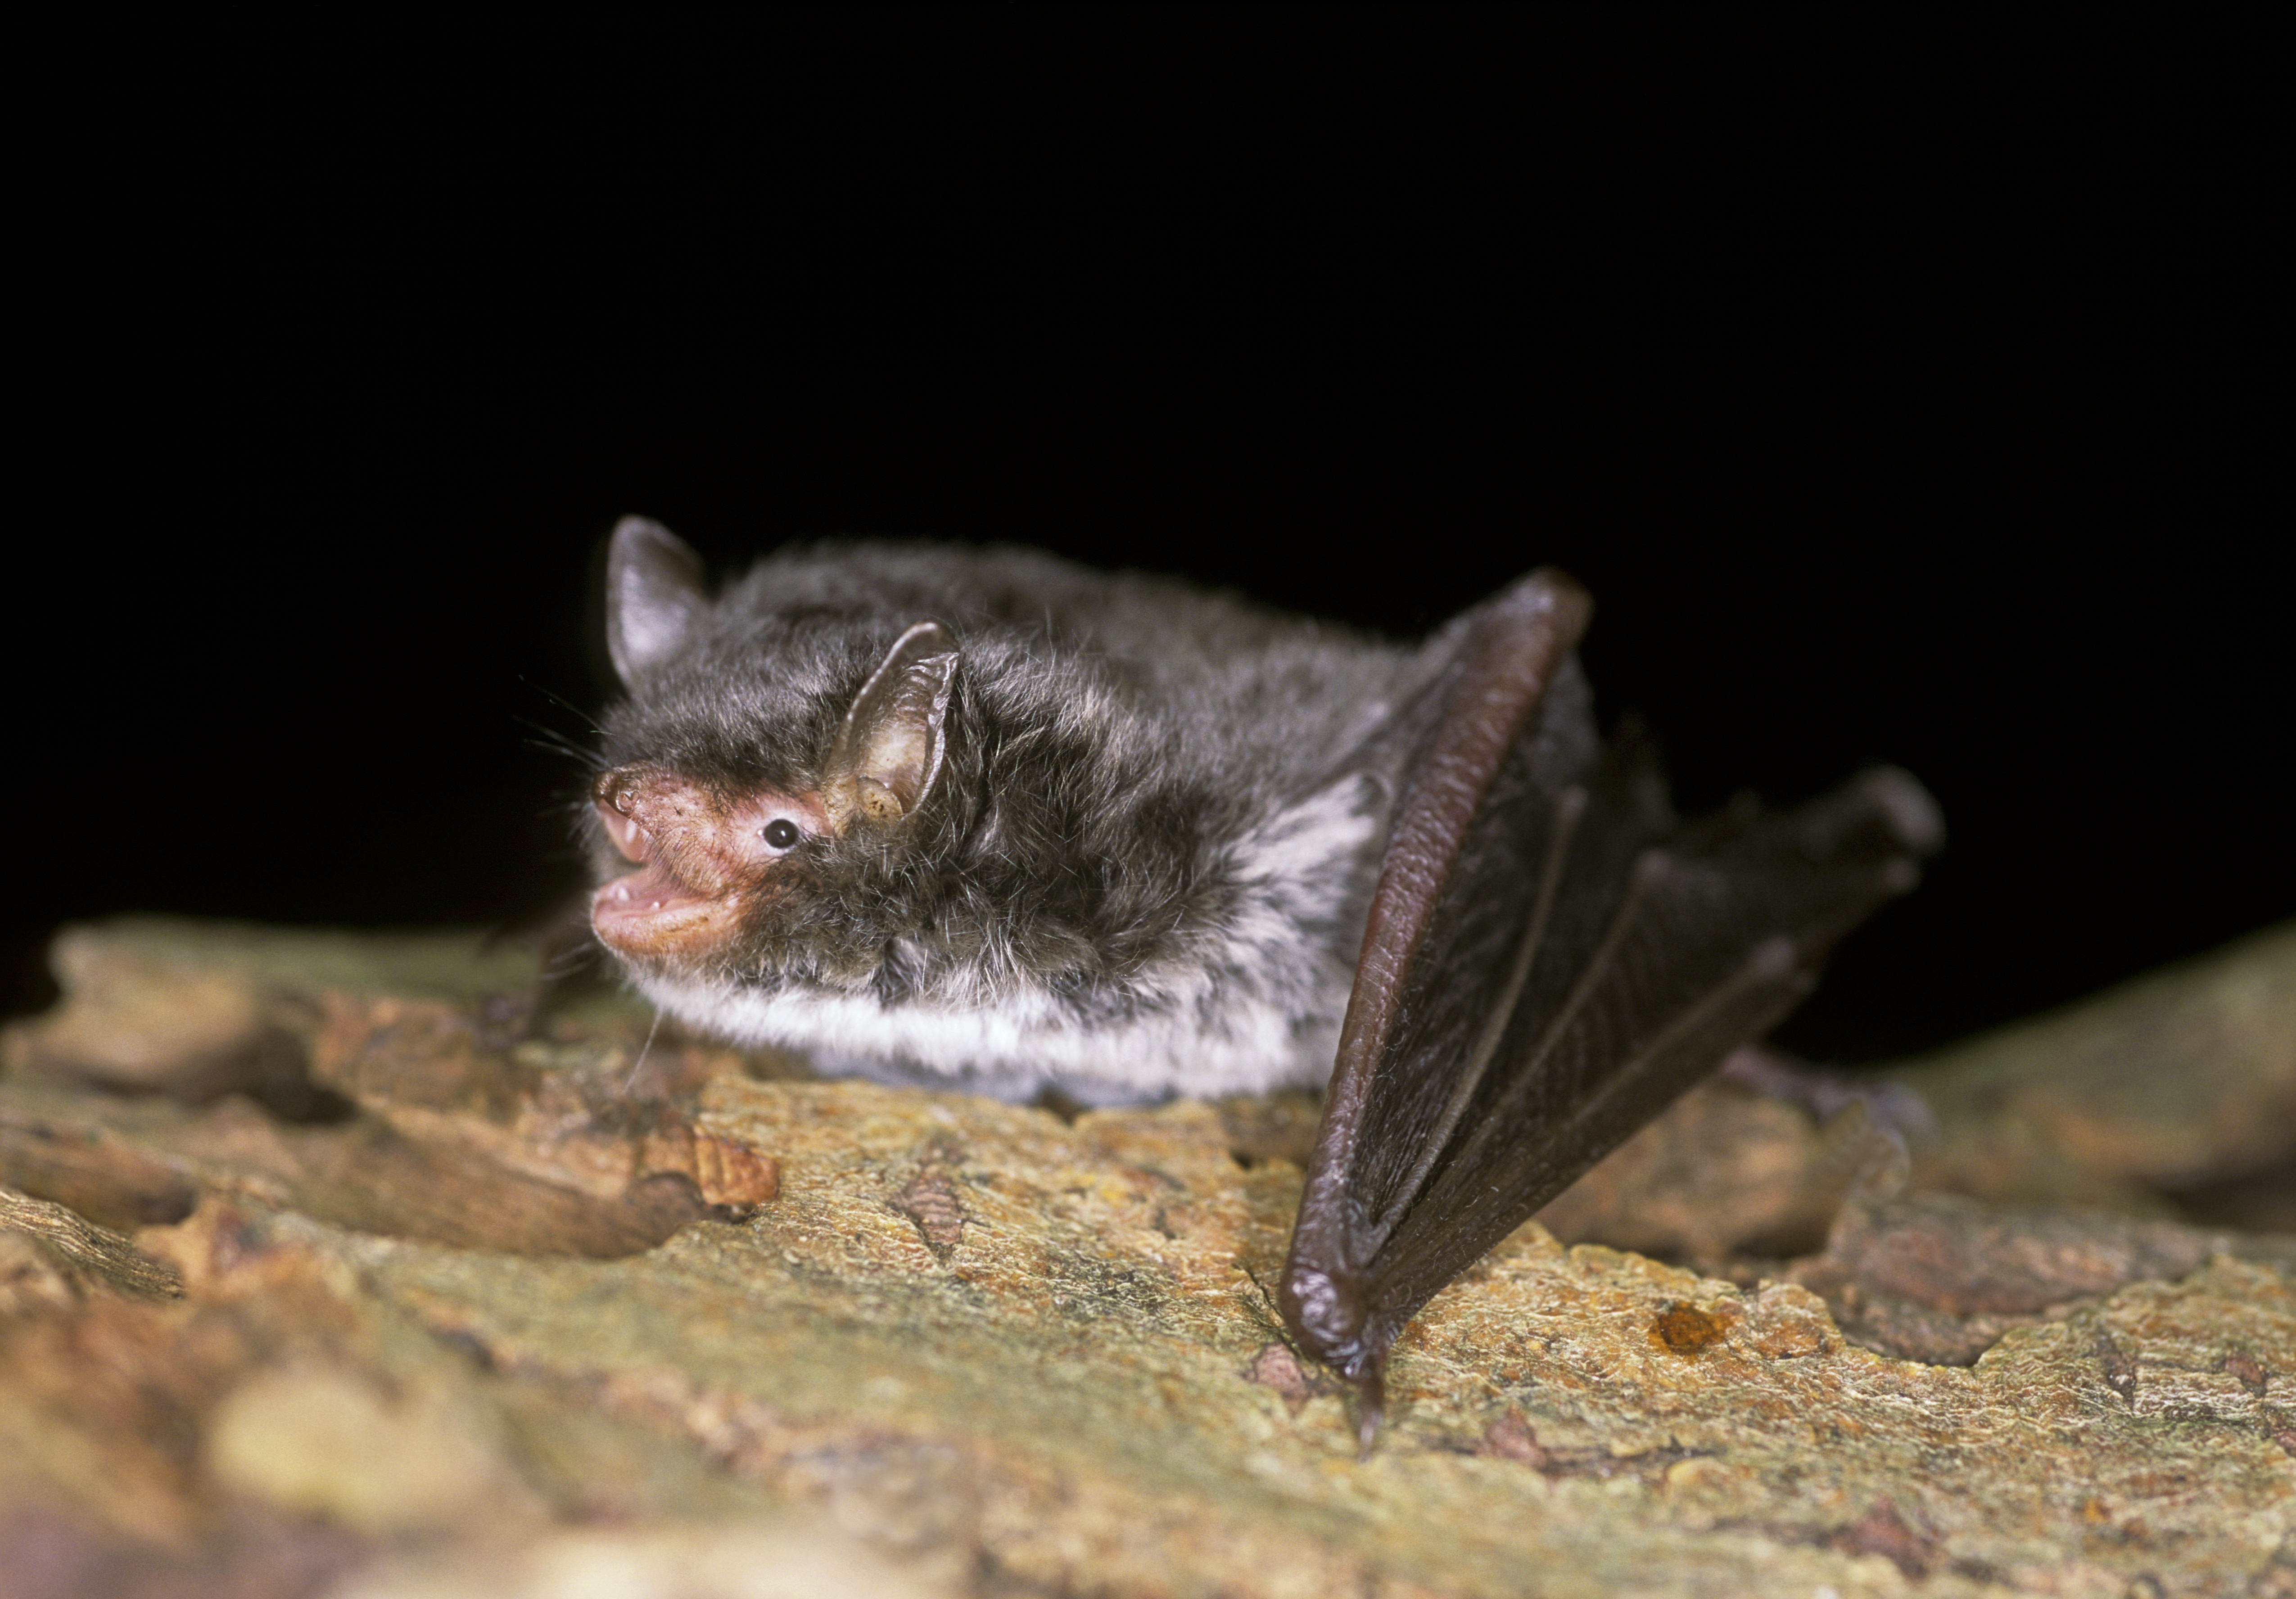 The pilot has allowed for large scale surveying that would not be possible before (Hugh Clark/www.bats.org.uk/PA)